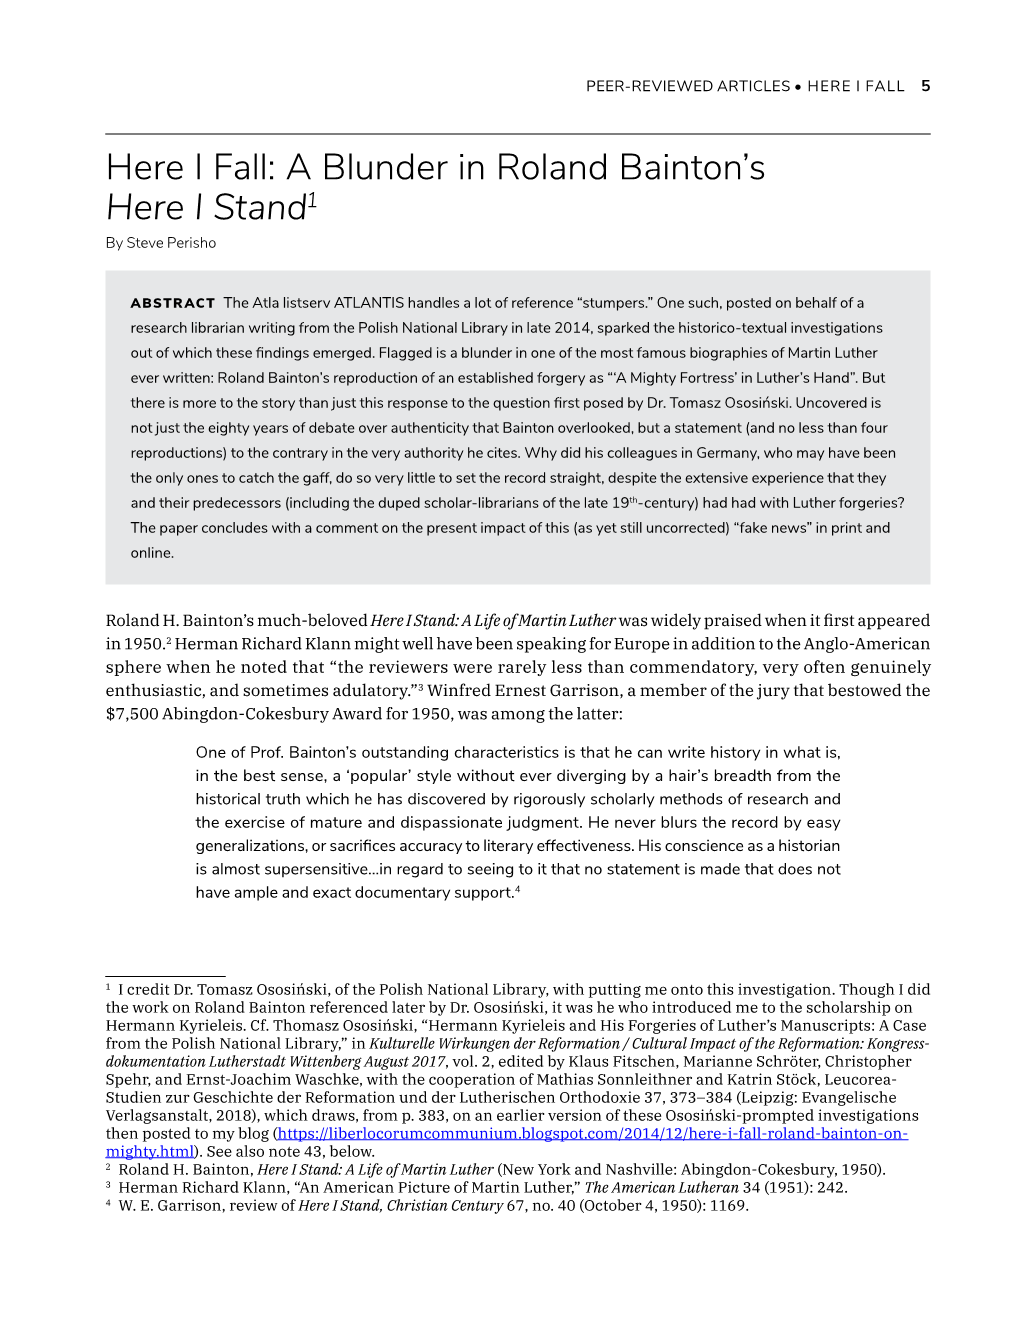 A Blunder in Roland Bainton's Here I Stand1